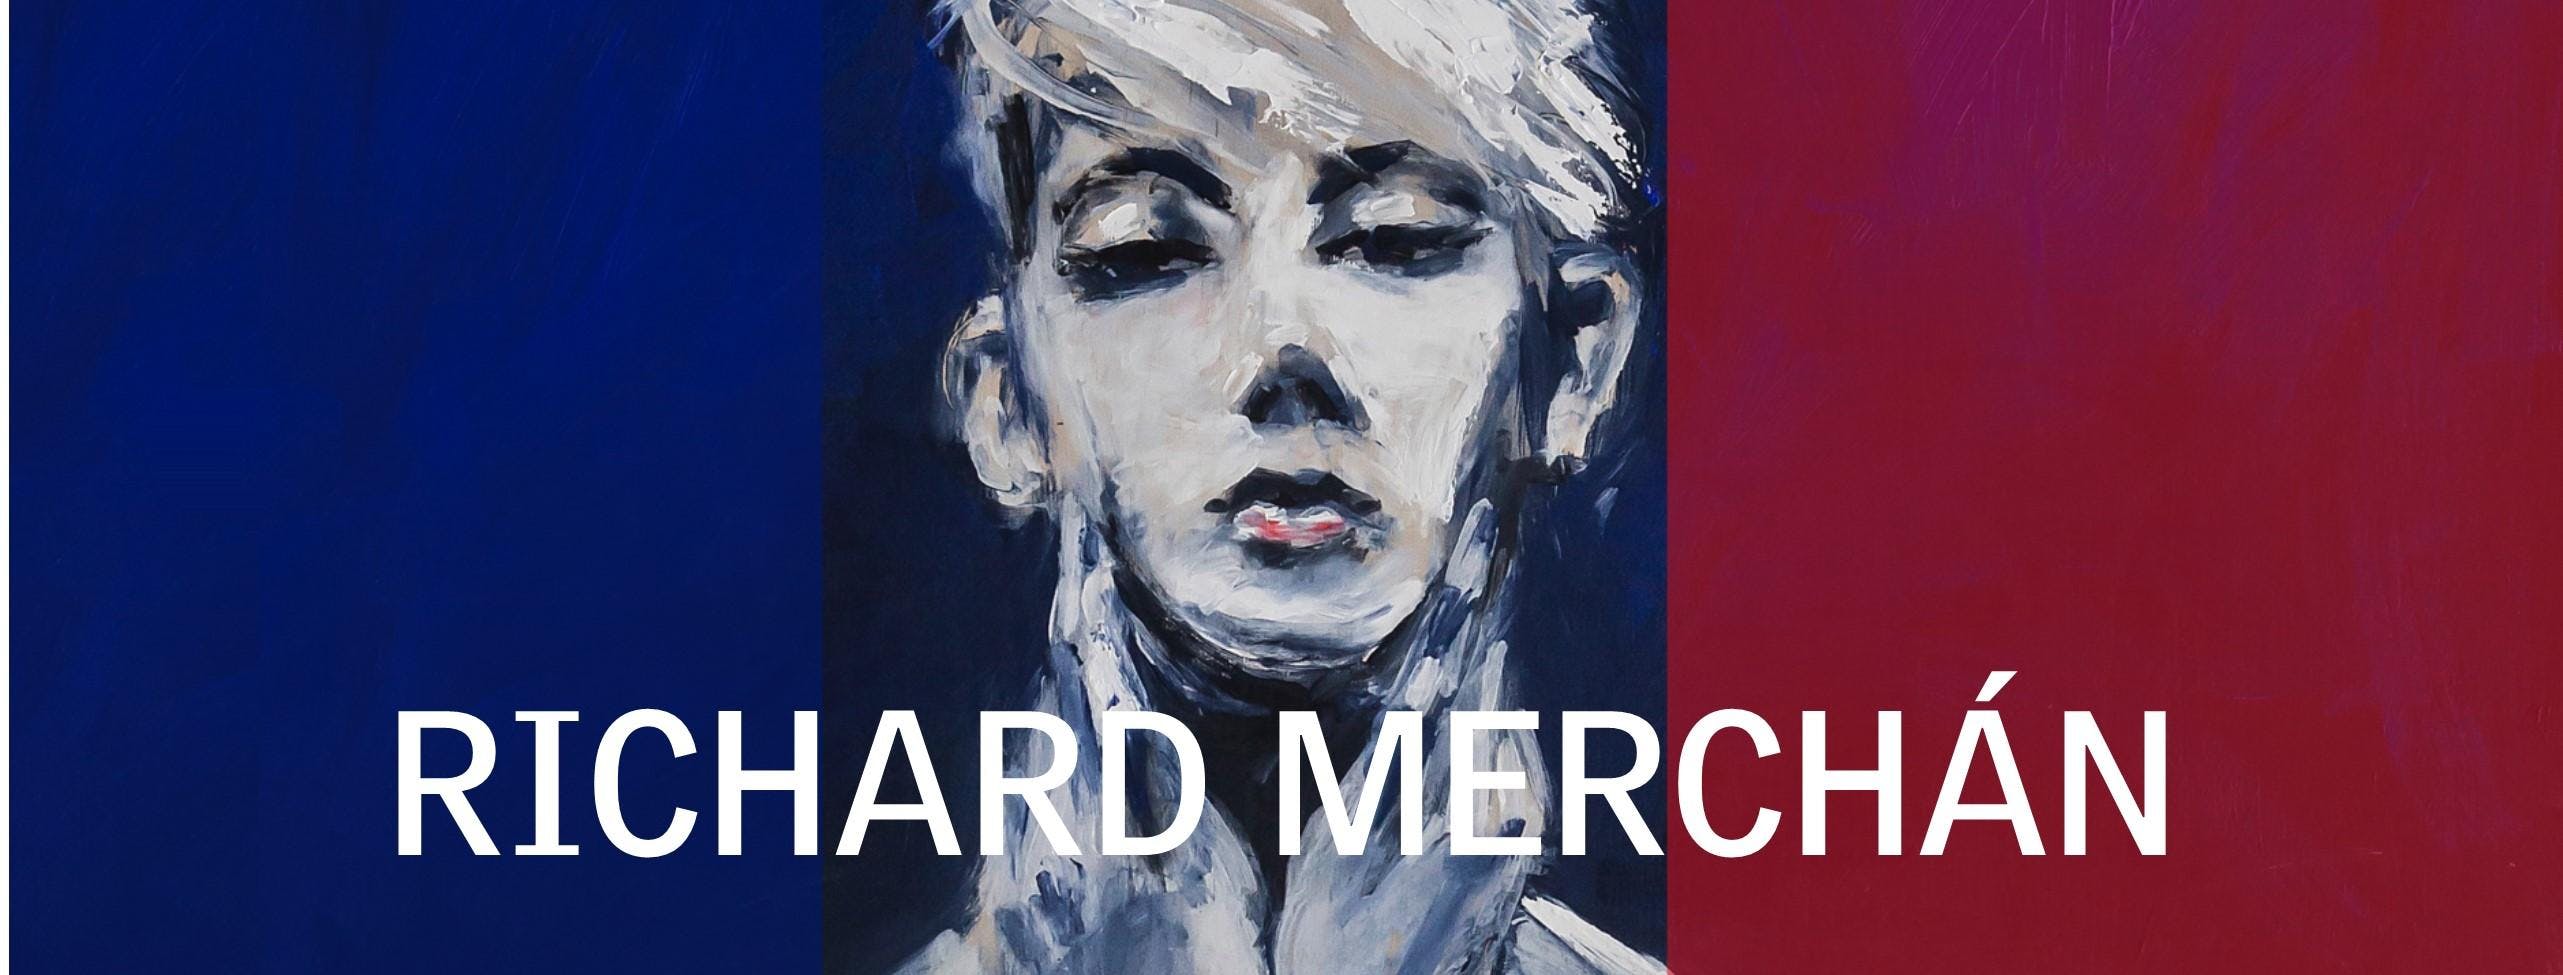 THE Gallery at Le Meridien Chambers Presents: Richard Merchan Exhibit 